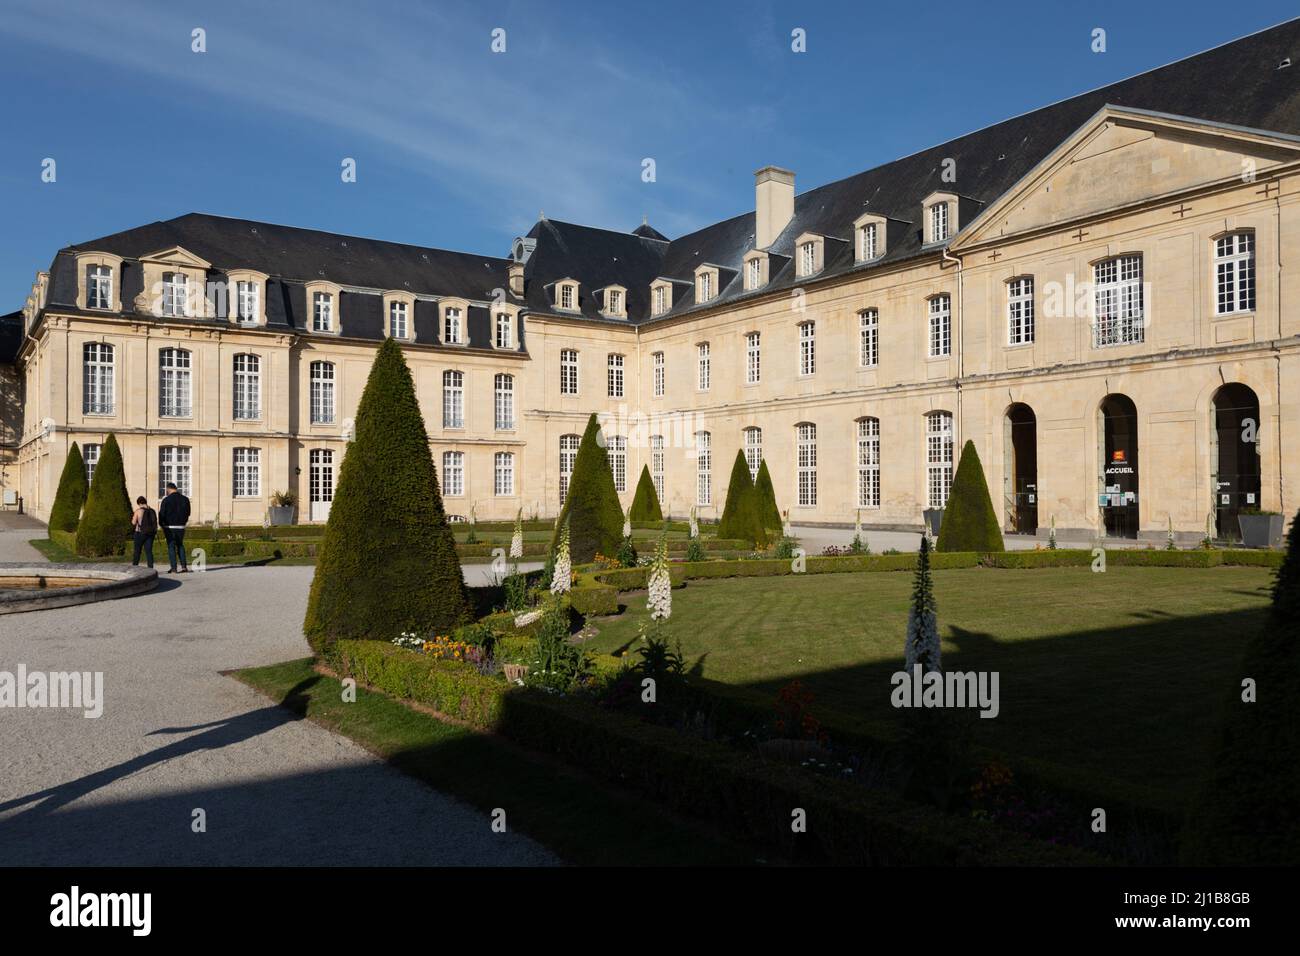 CONVENT BUILDINGS OF THE ABBAYE AUX DAMES, FORMER MONASTERY OF BENEDICTINE MONKS THAT TODAY HOUSES THE REGIONAL COUNCIL OF NORMANDY, CAEN, CALVADOS, NORMANDY, FRANCE Stock Photo